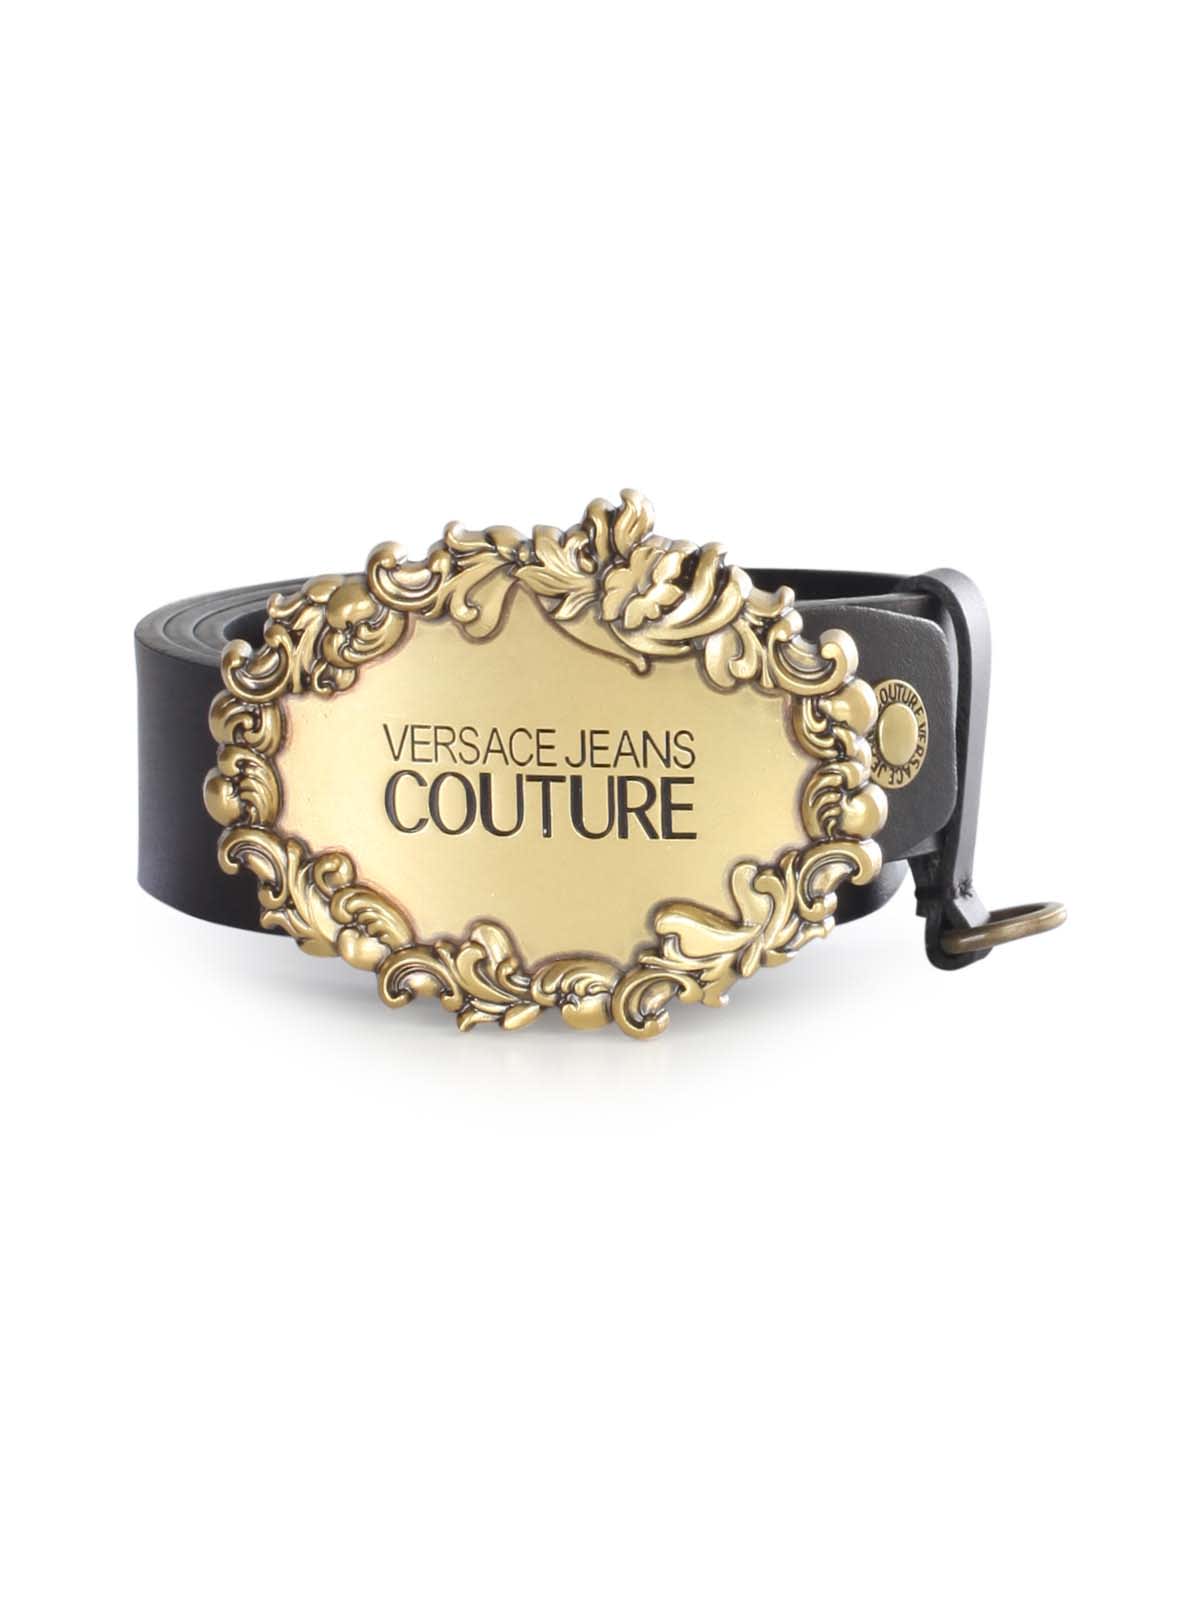 Versace Jeans Couture Printed Belt W/circle Buckle